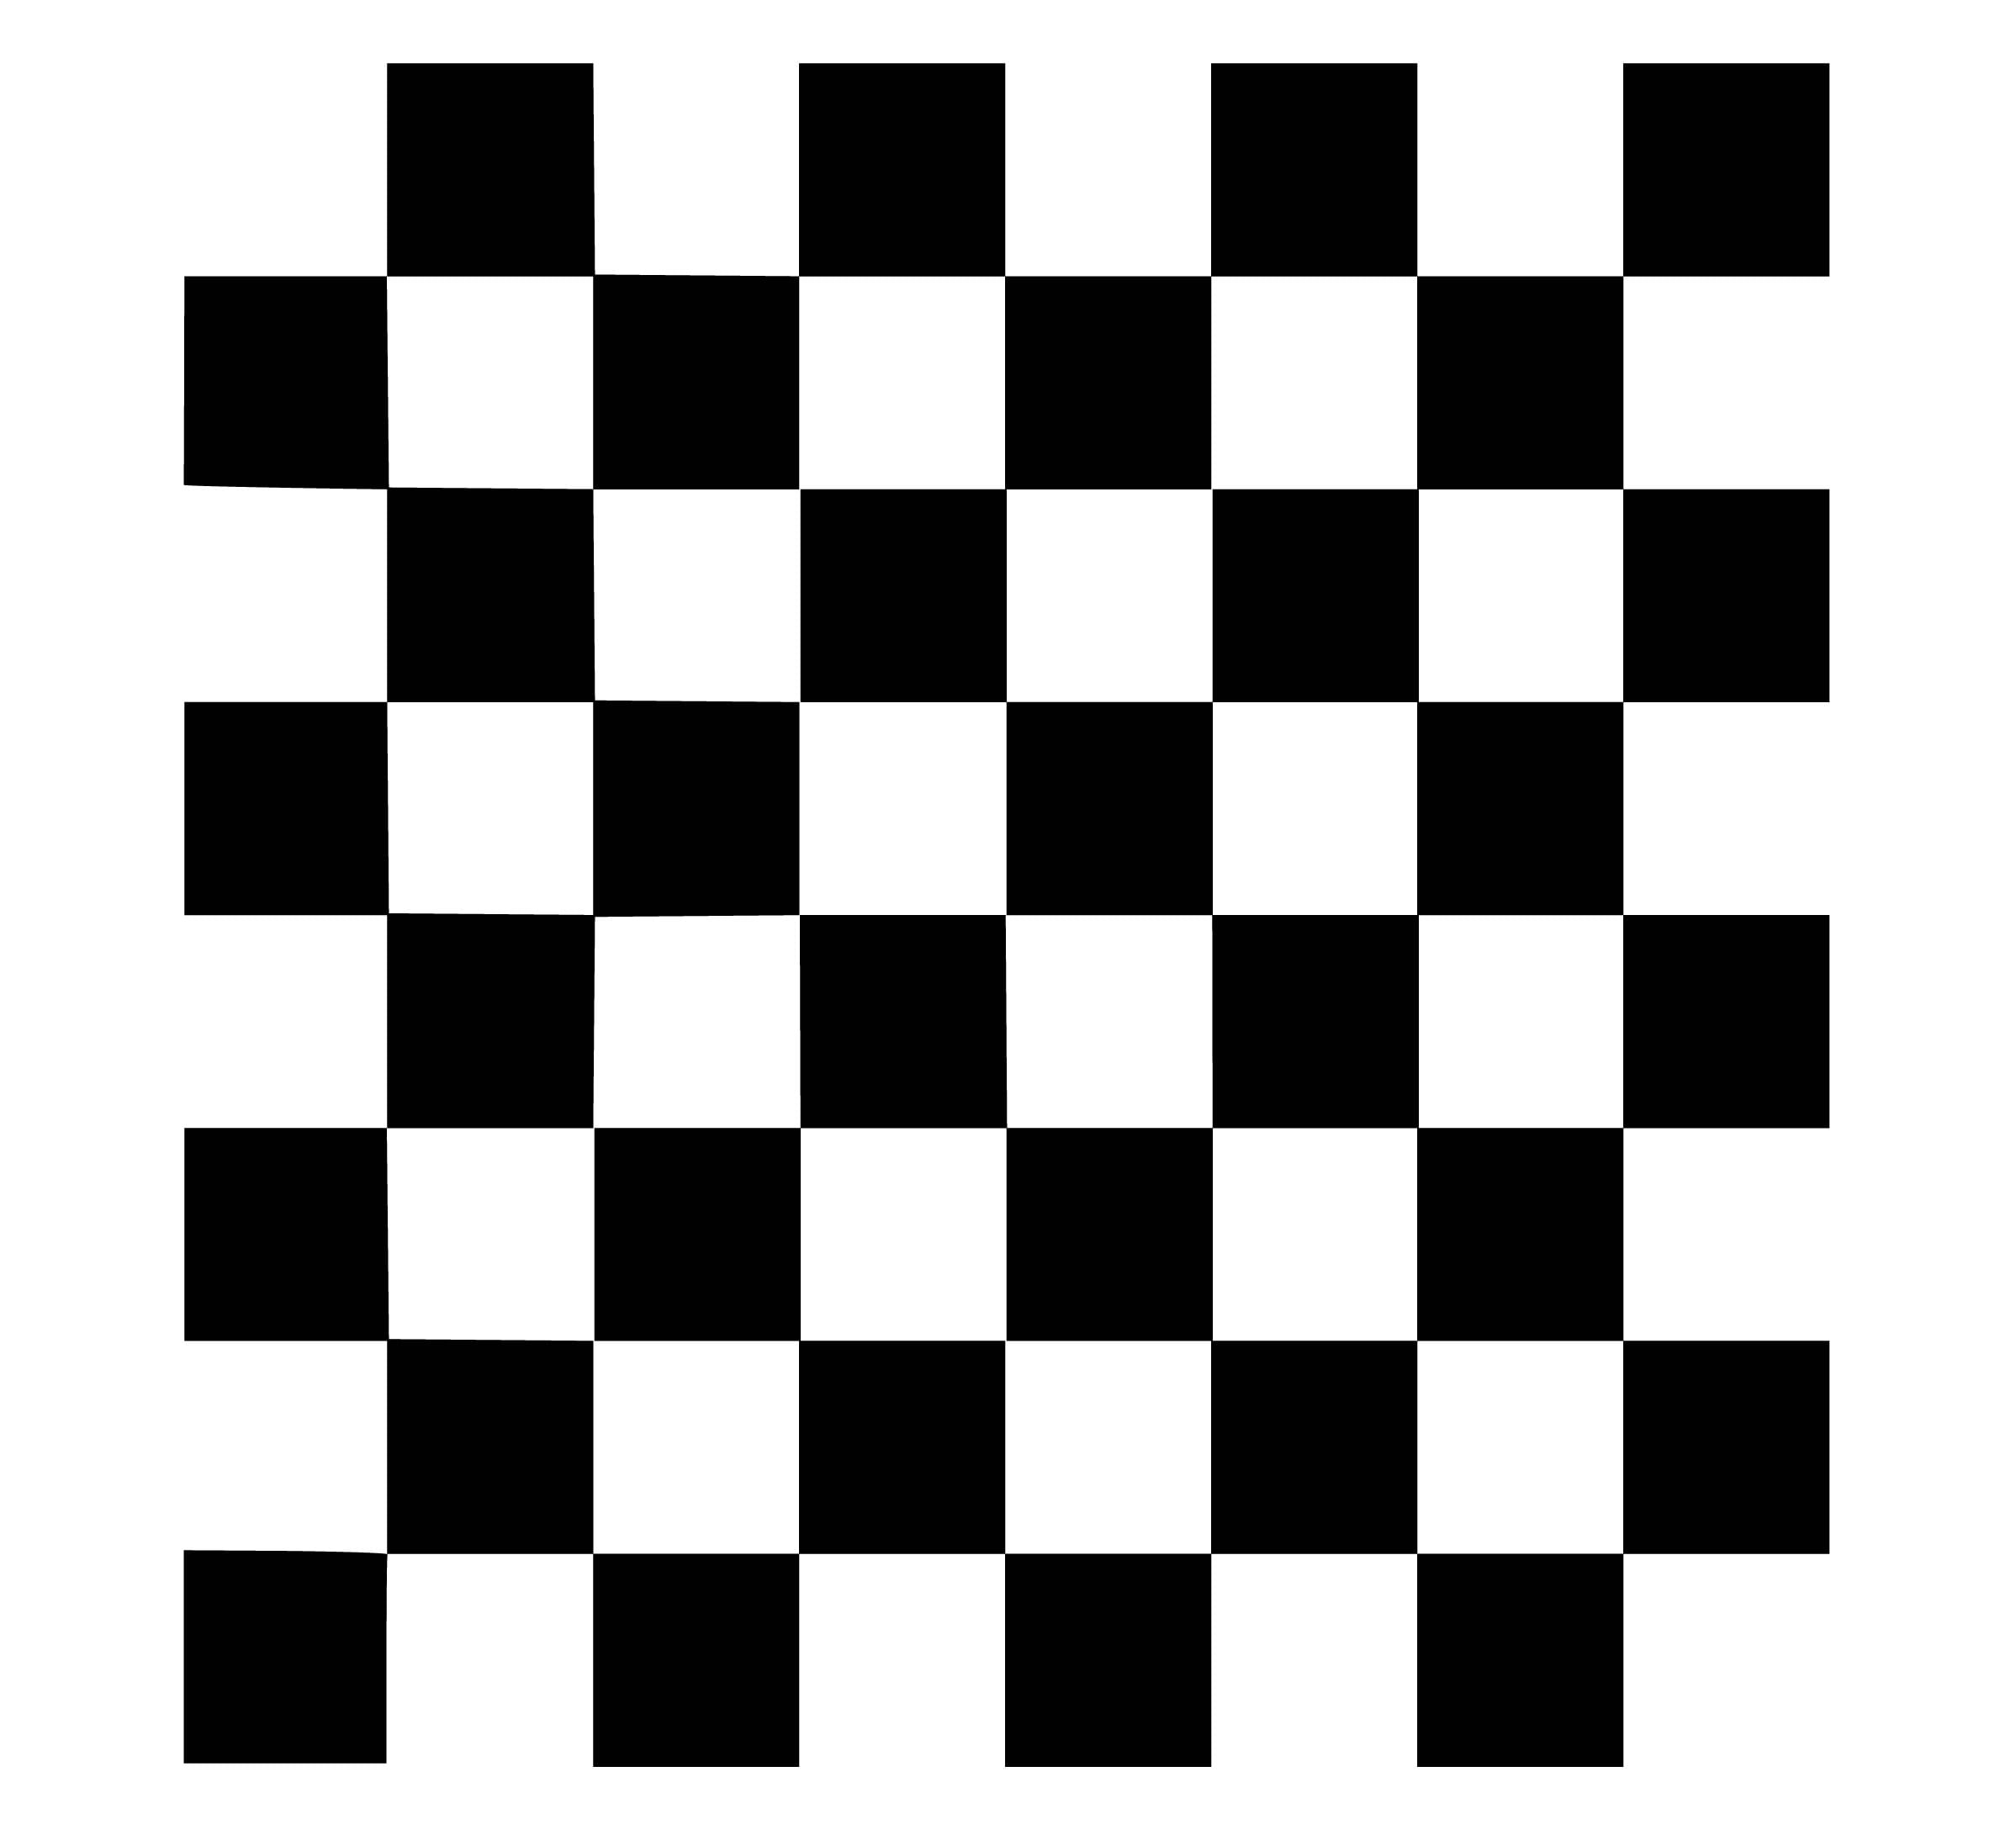  Ambesonne Checkers Game Tapestry, Monochrome Chess Board Design  with Tile Coordinates Mosaic Square Pattern, Wall Hanging for Bedroom  Living Room Dorm Decor, 60 X 80, Black White : Home & Kitchen